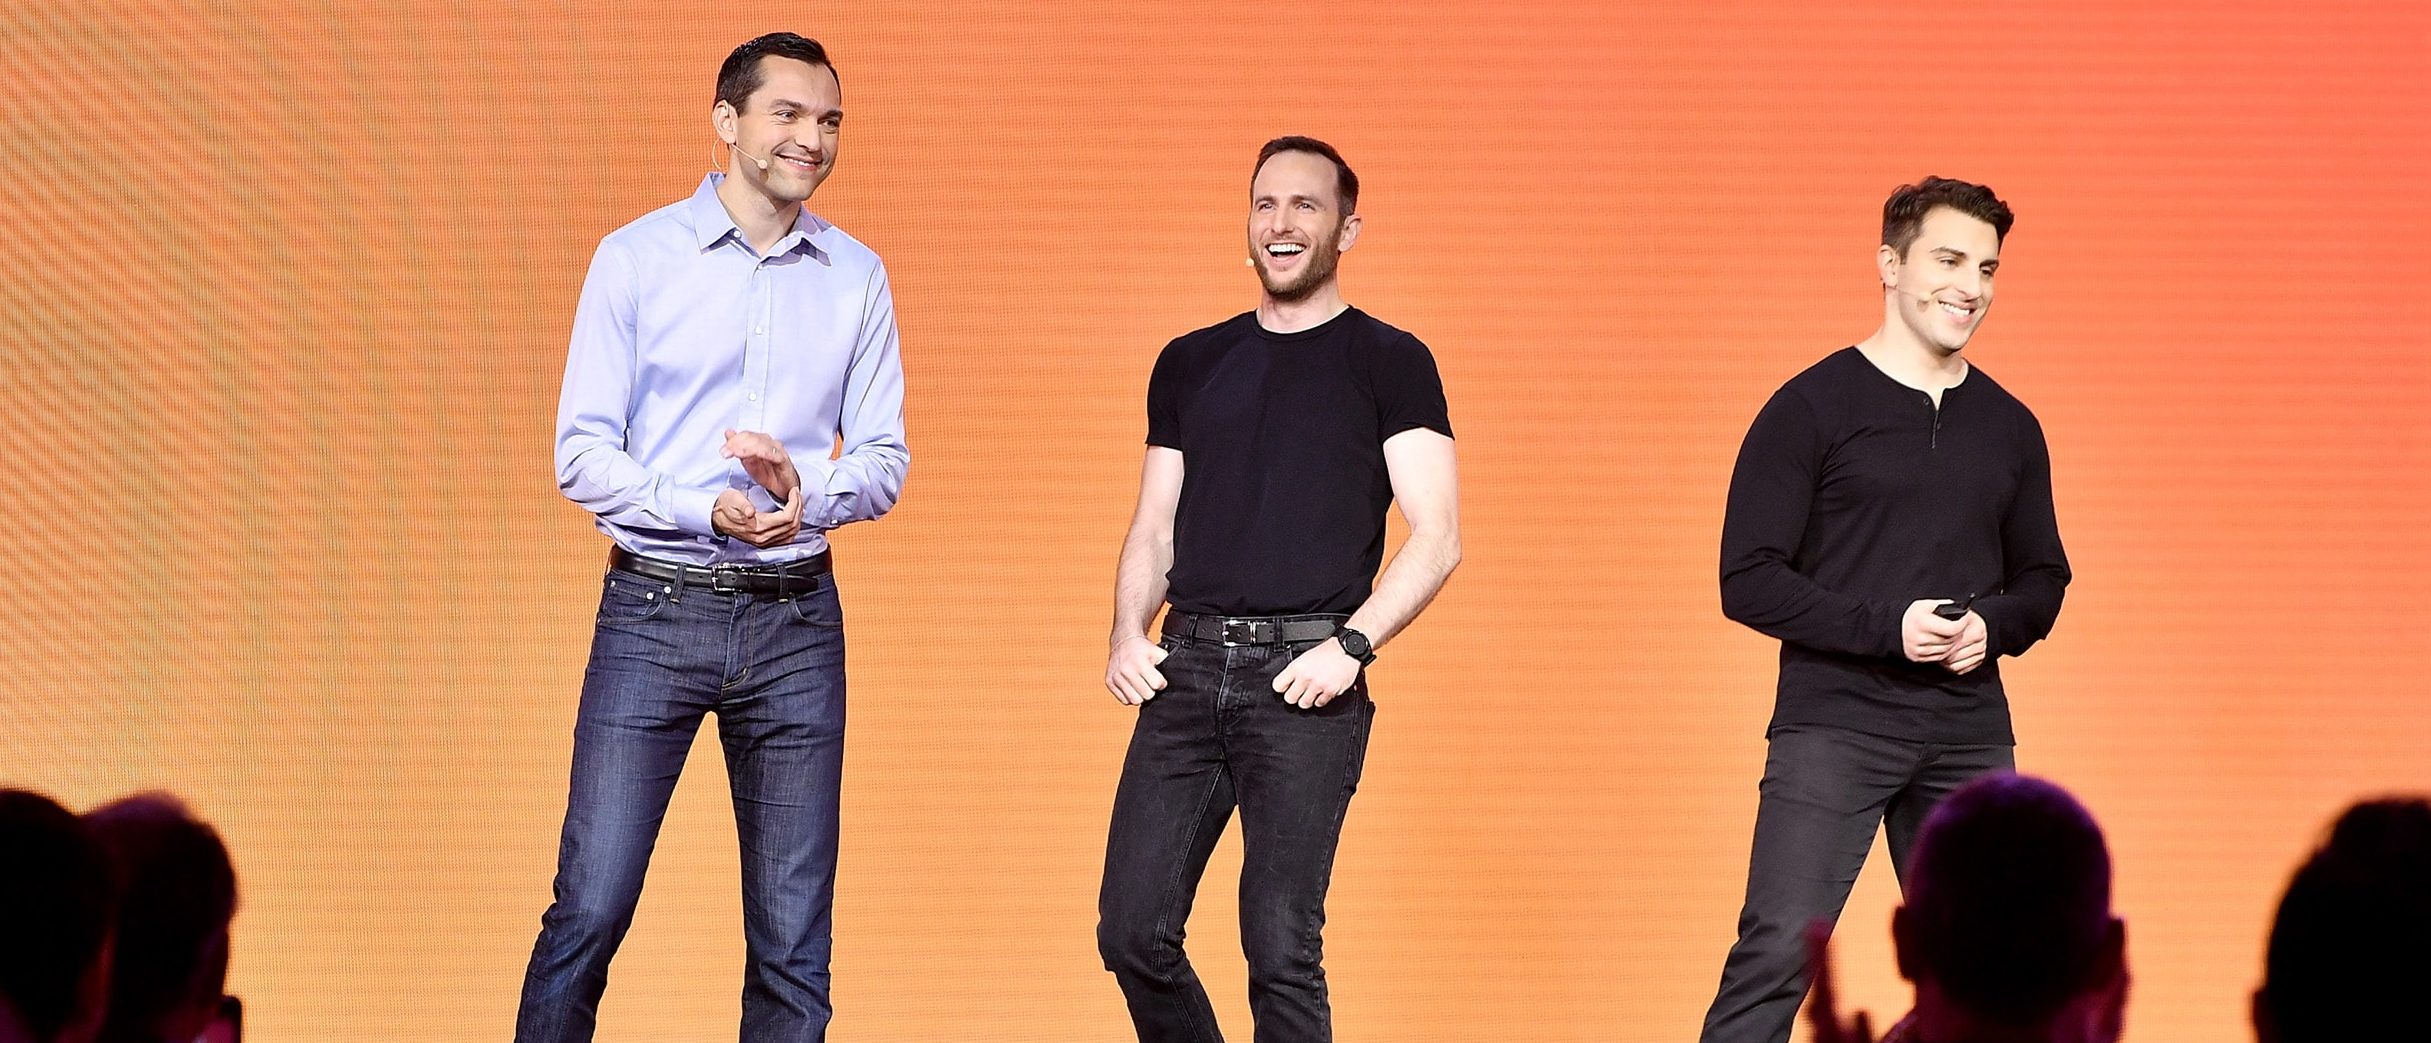 Brian Chesky, Joe Gebbia and Nathan Blecharczyk, Author at Airbnb Newsroom